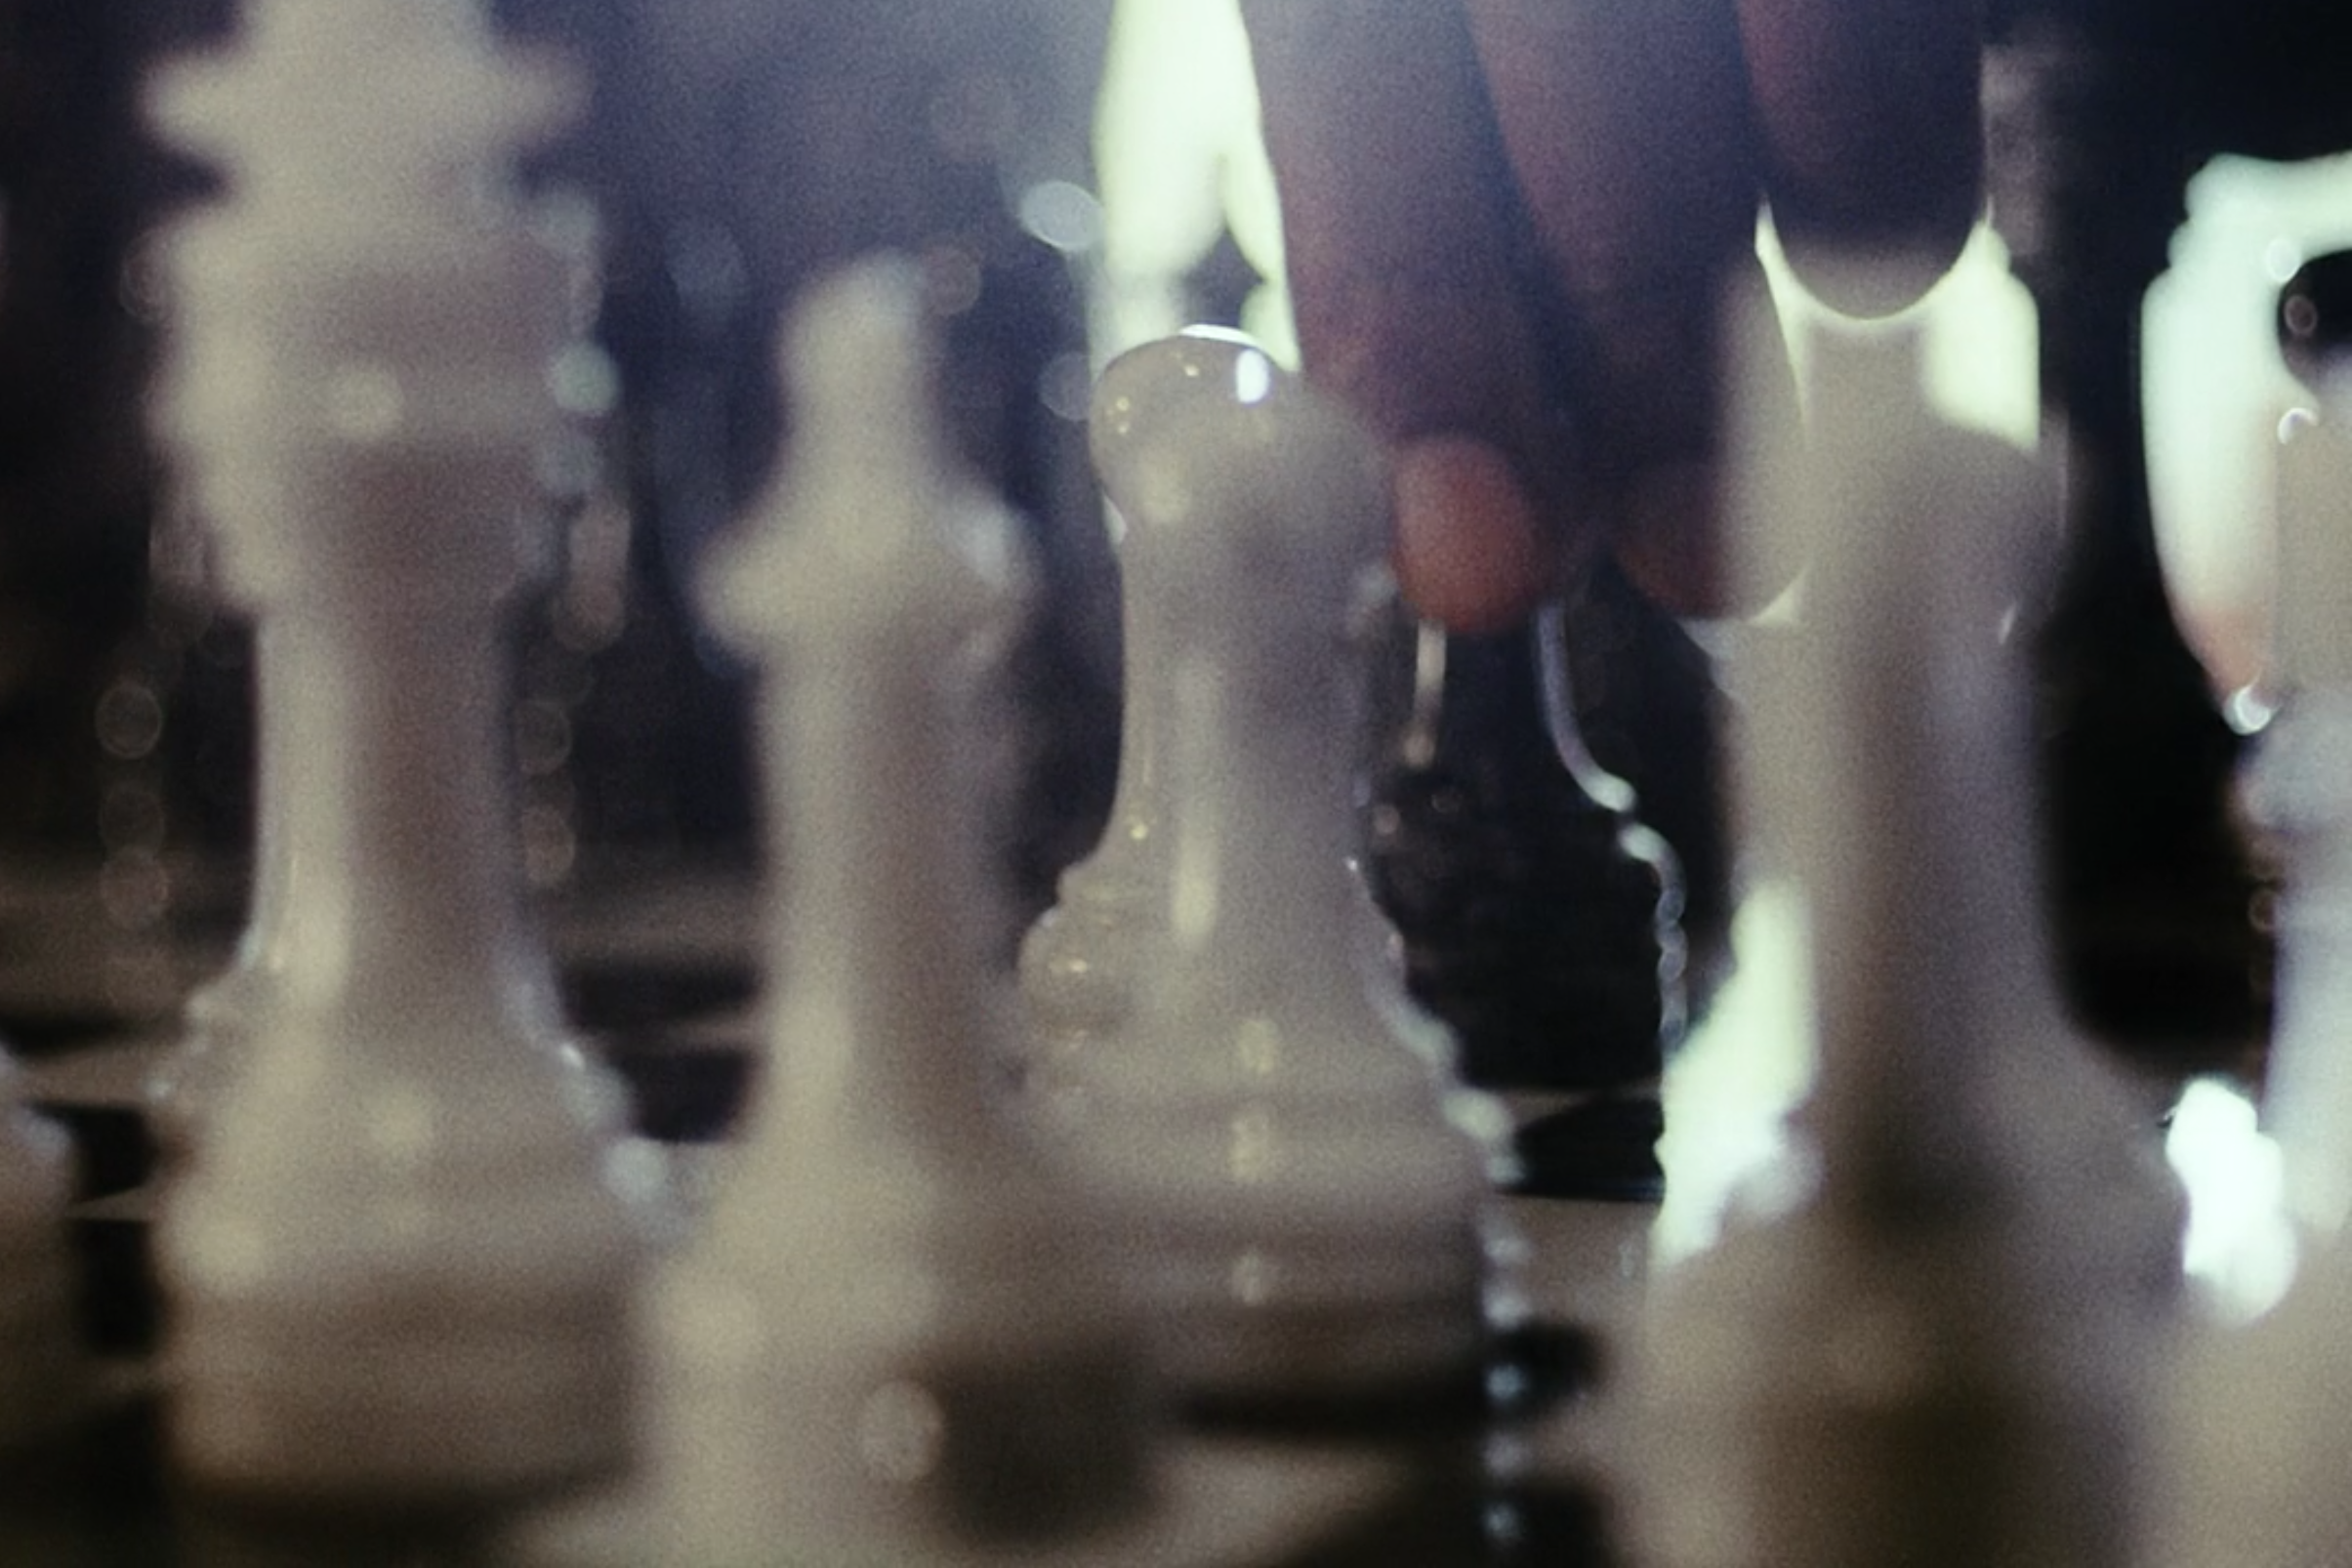 A hand is seen on a pawn in a chessboard.